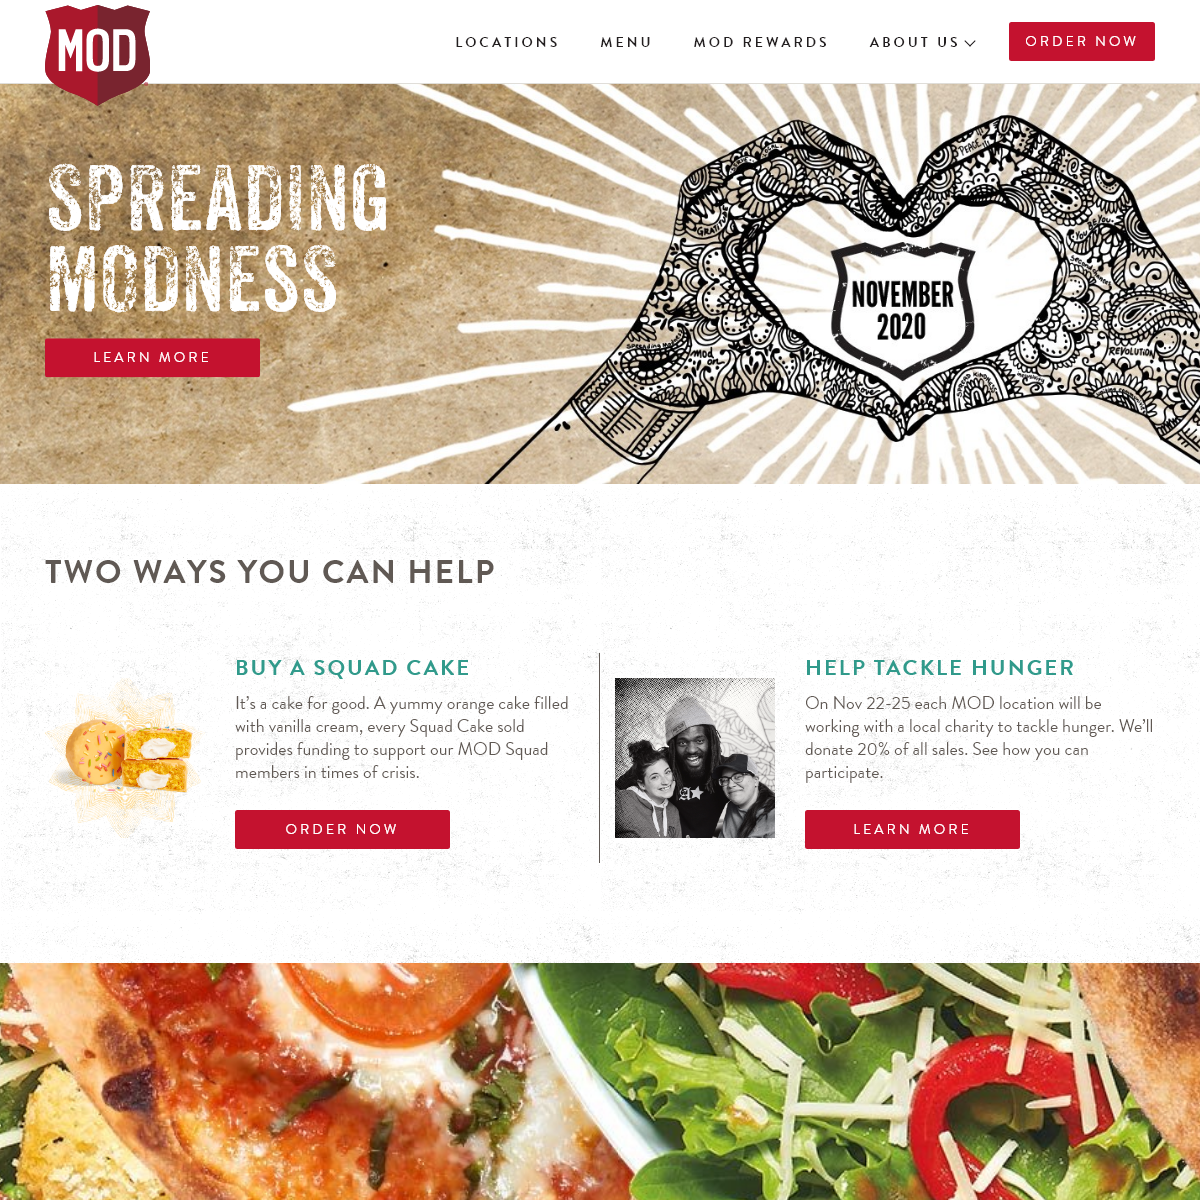 A complete backup of modpizza.com